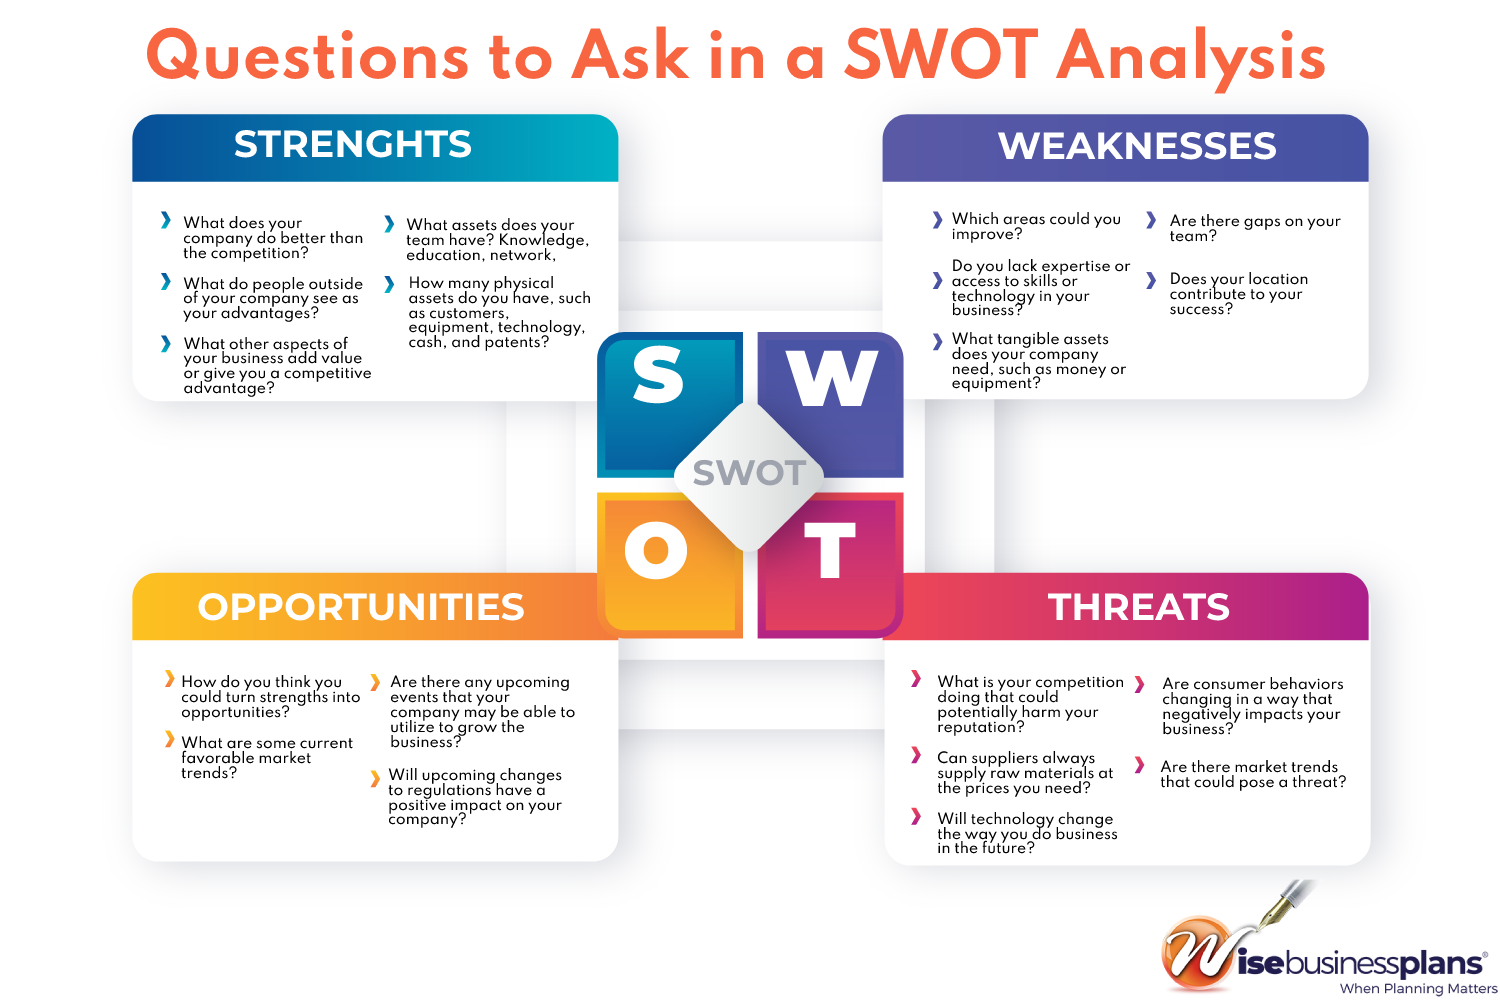 Questions to Ask During a SWOT Analysis